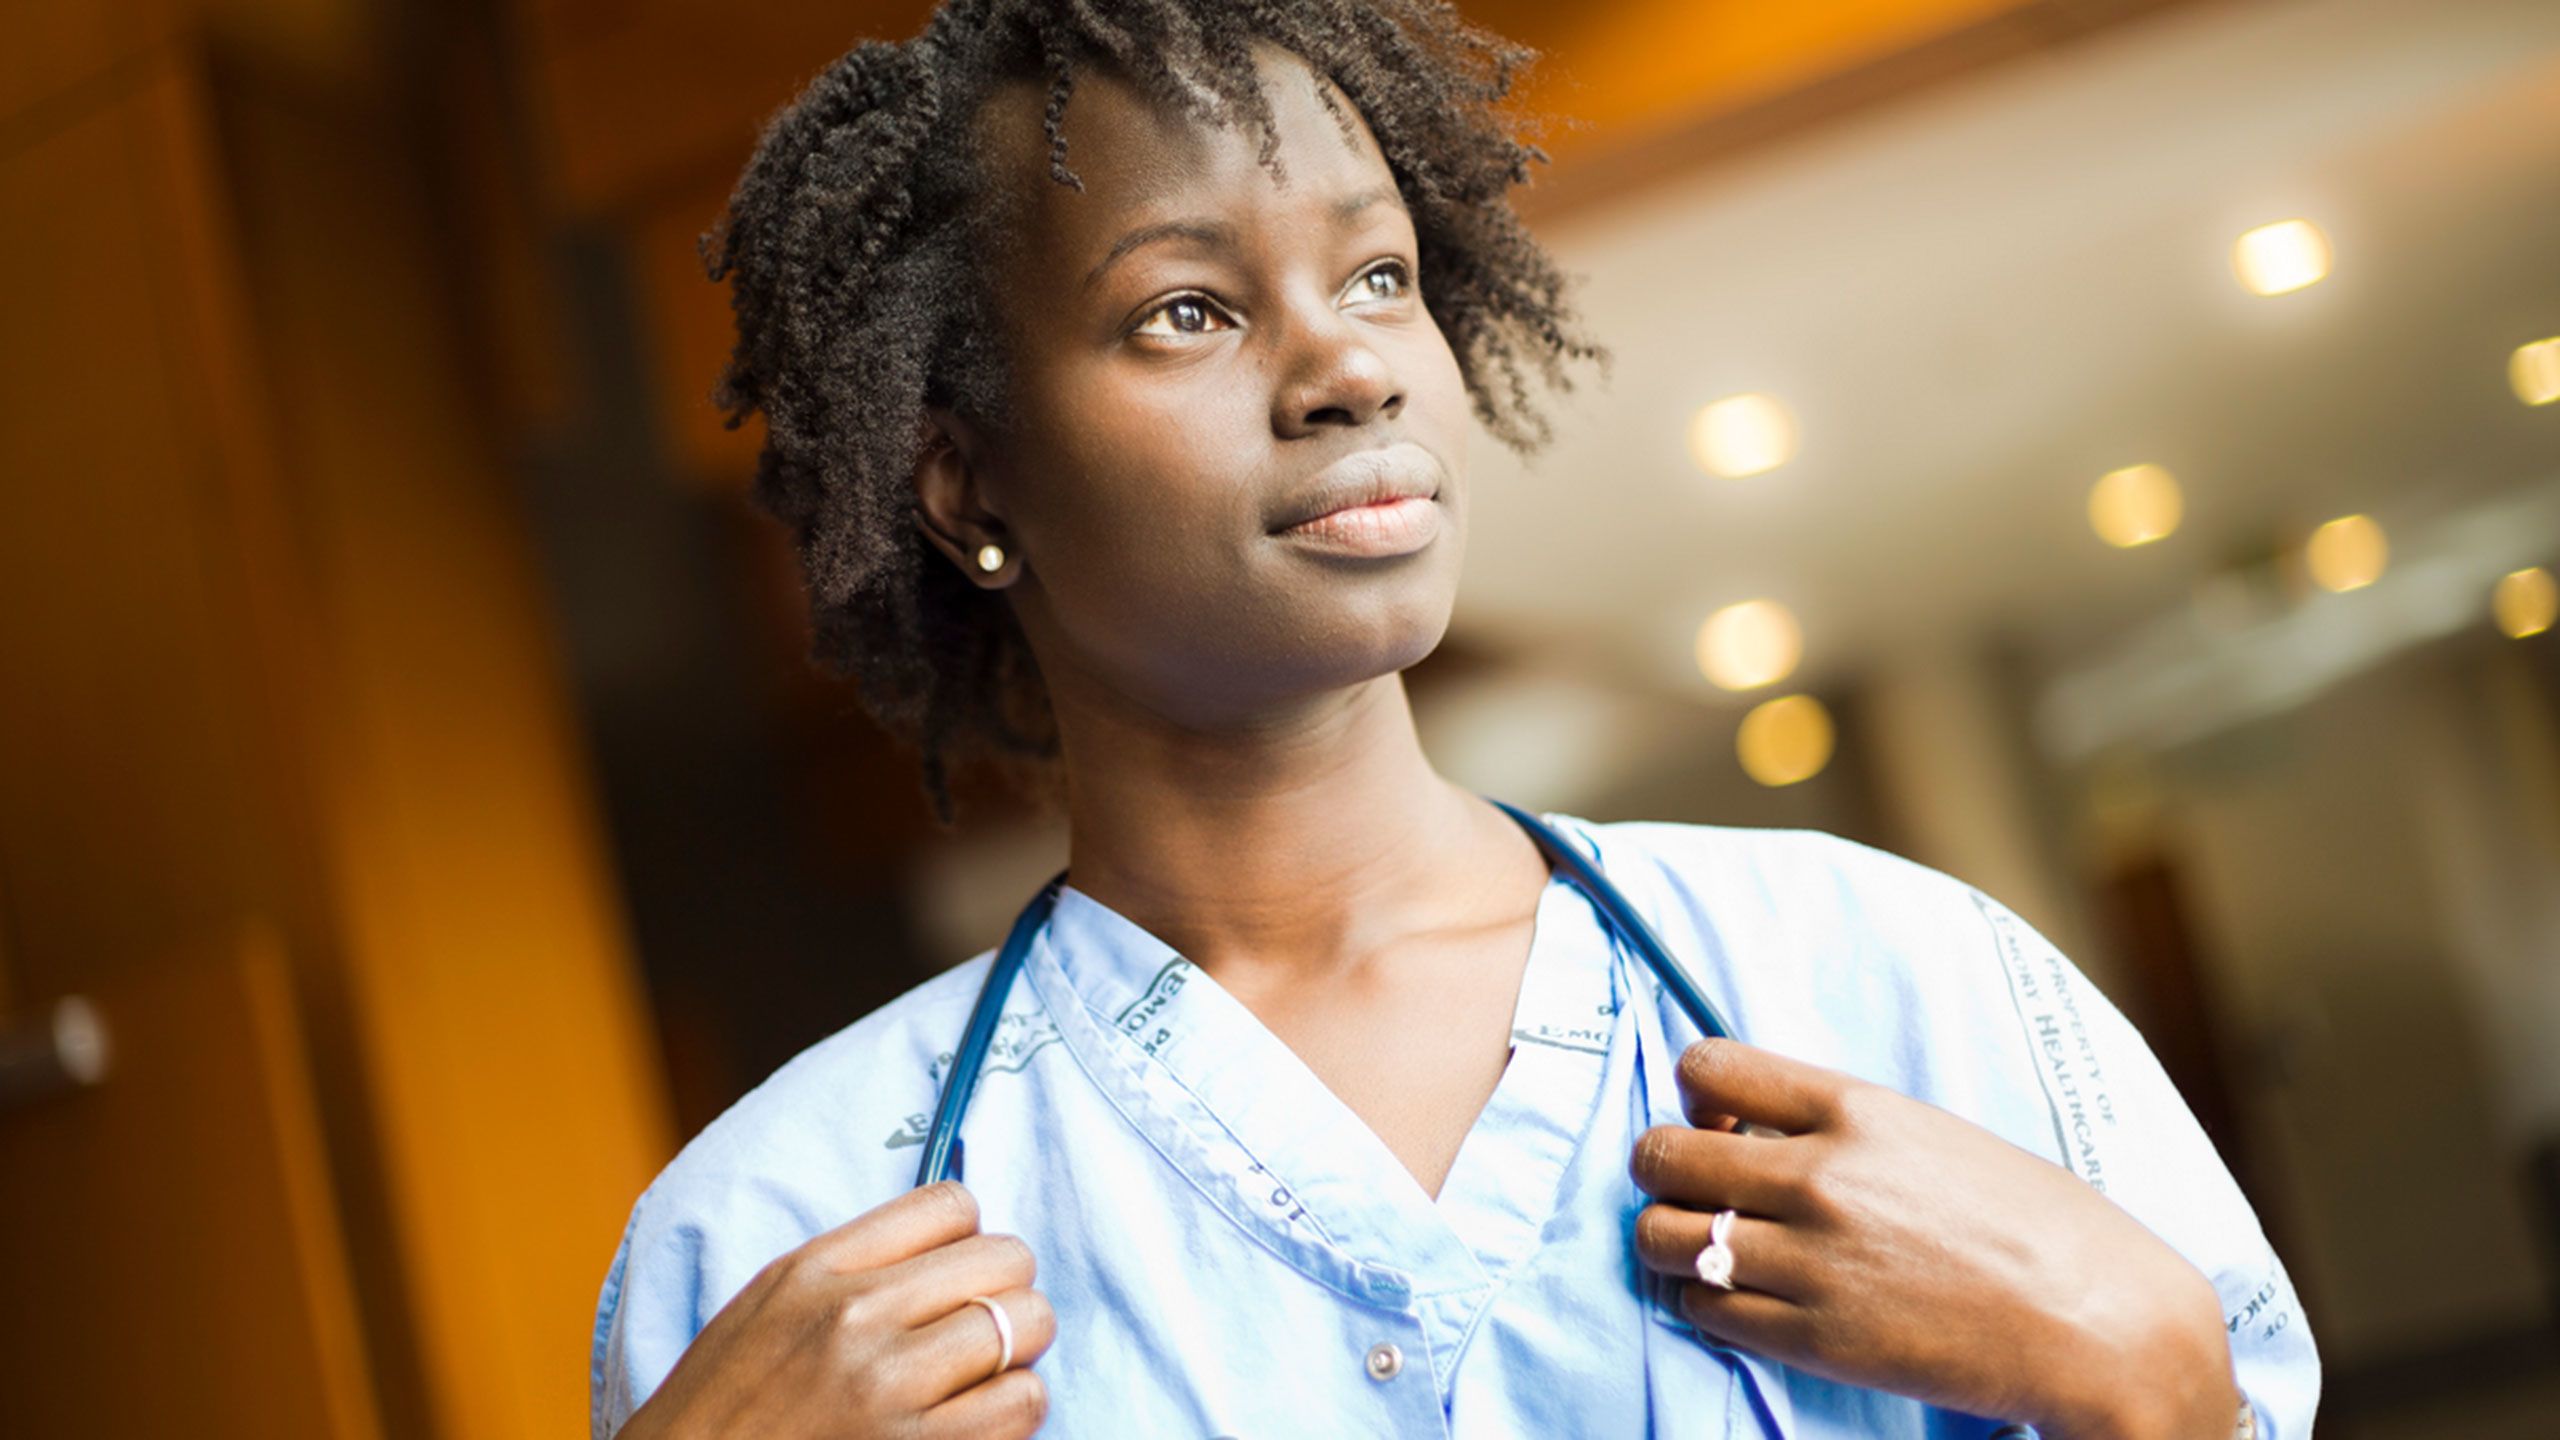 Lurit Bepo poses in scrubs, holding her stethoscope.